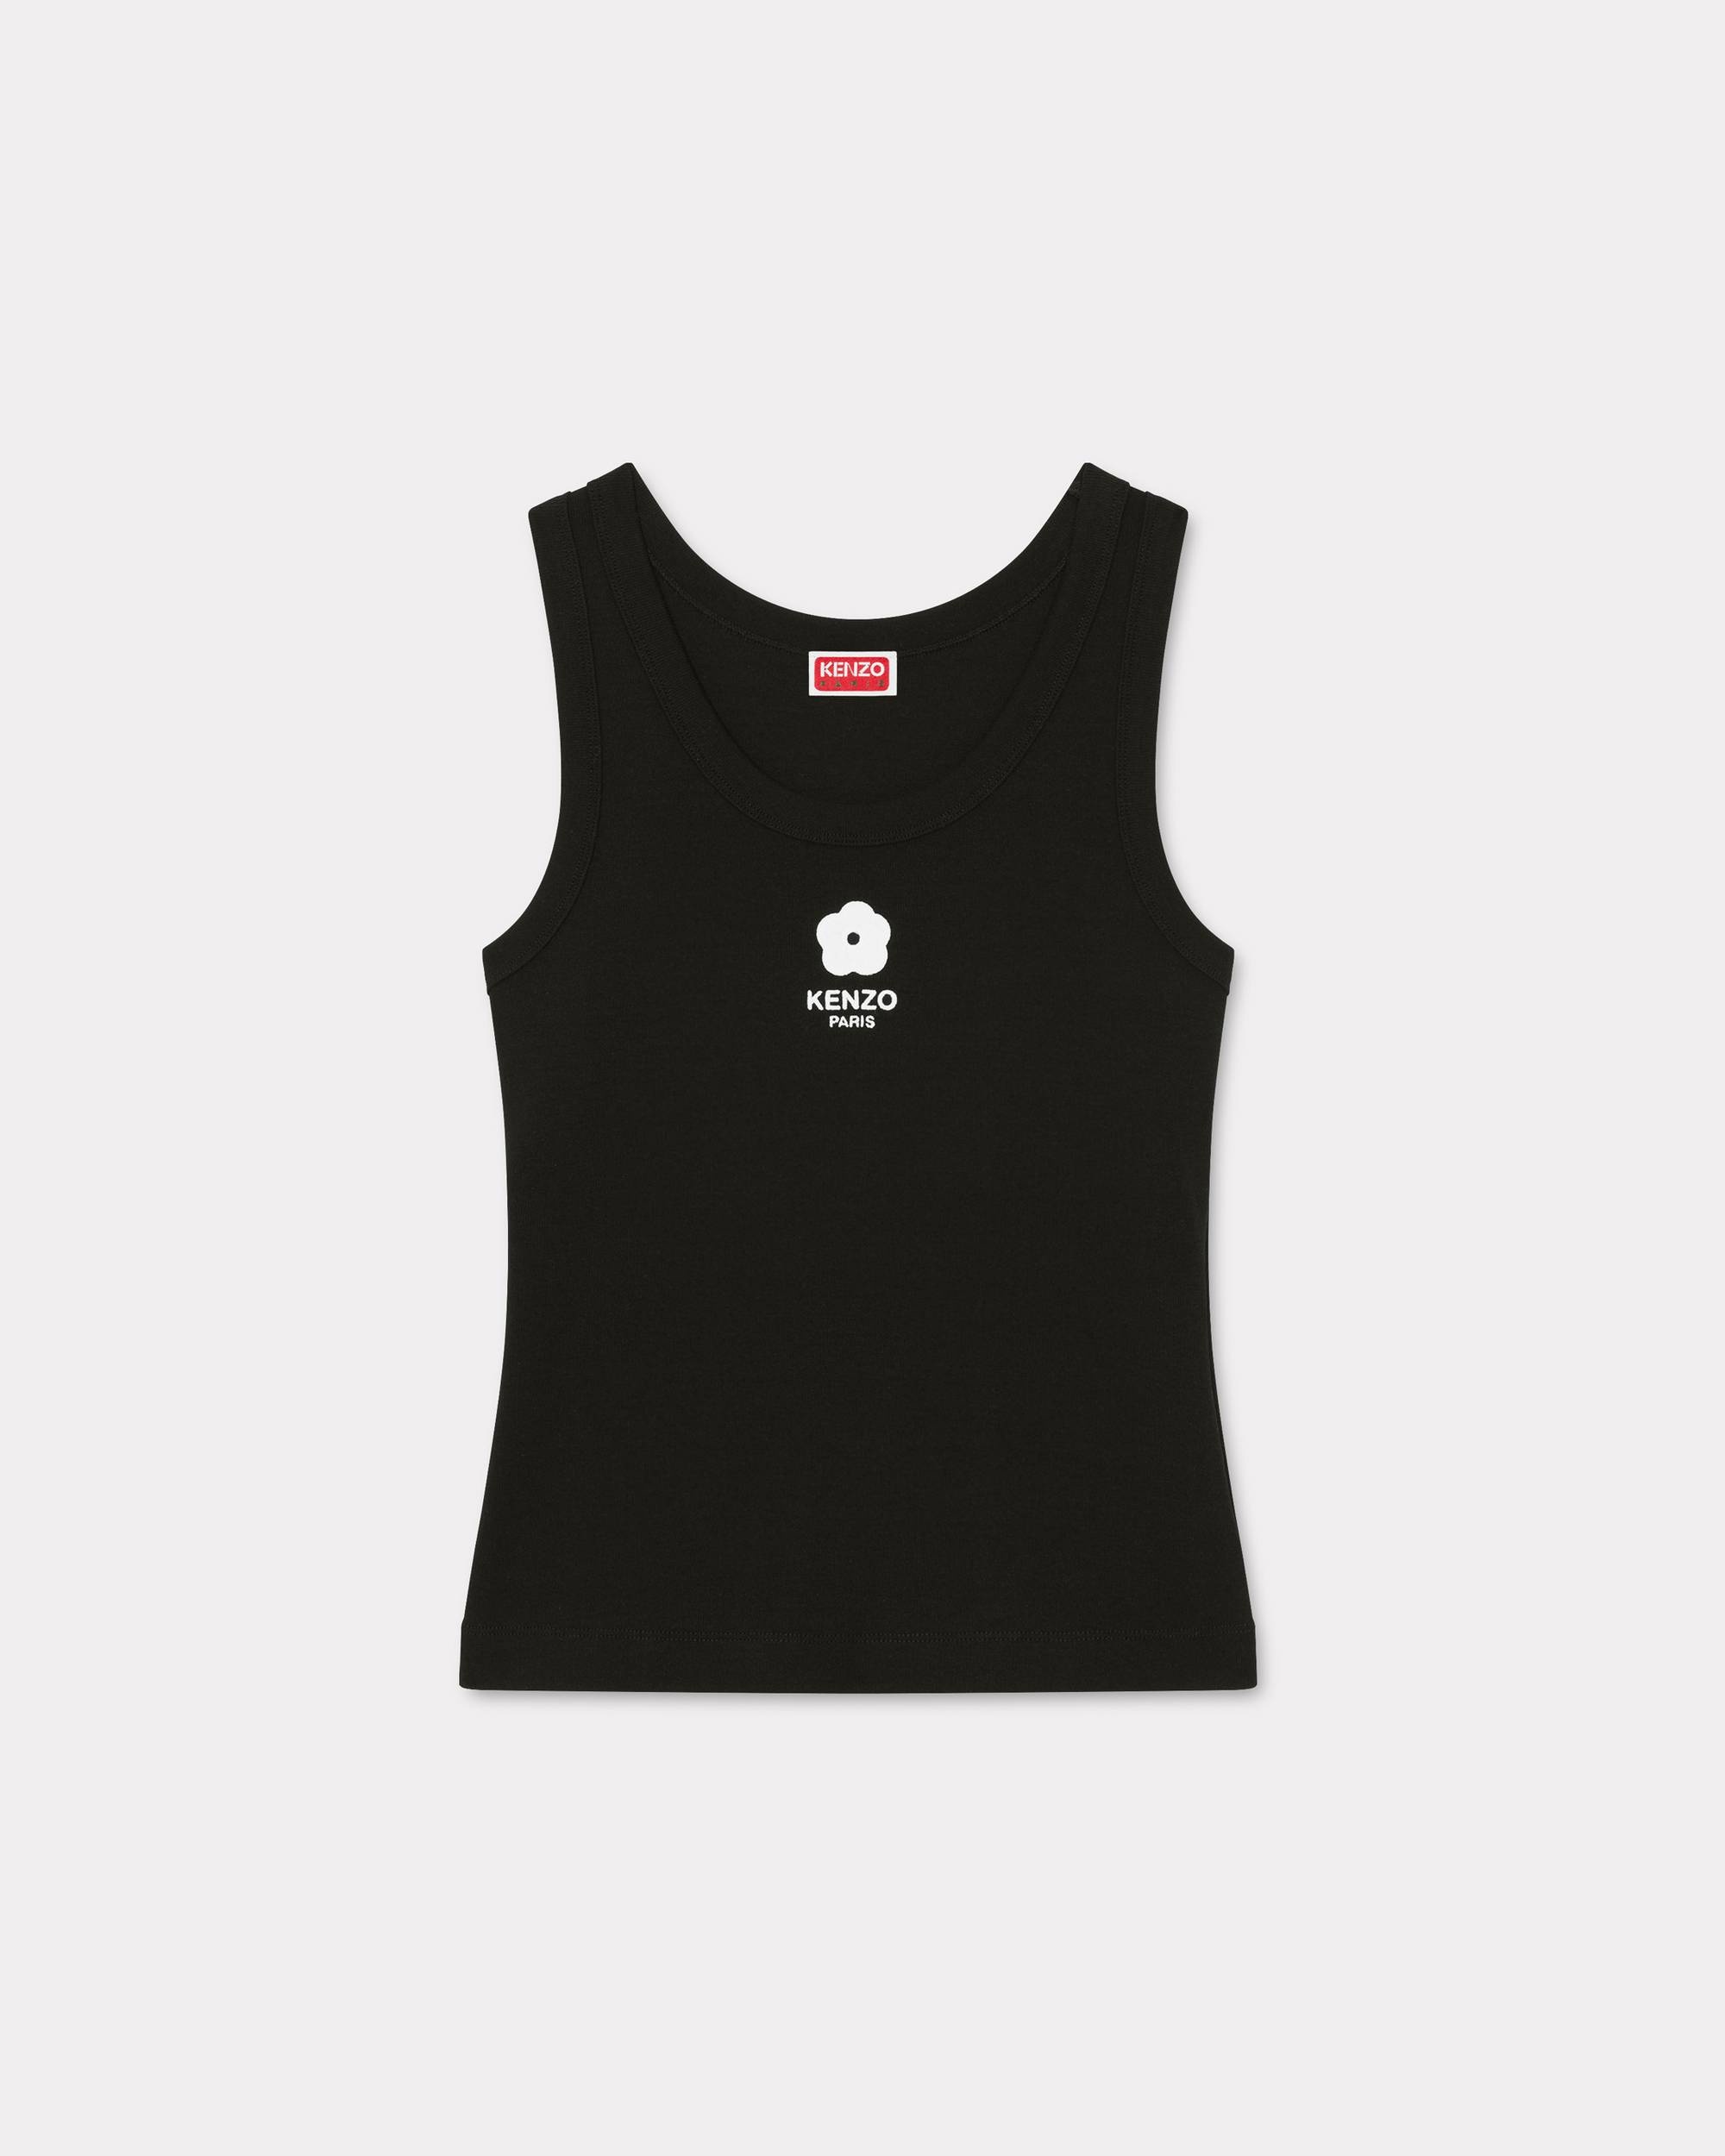 'BOKE 2.0' embroidered tank top - 1